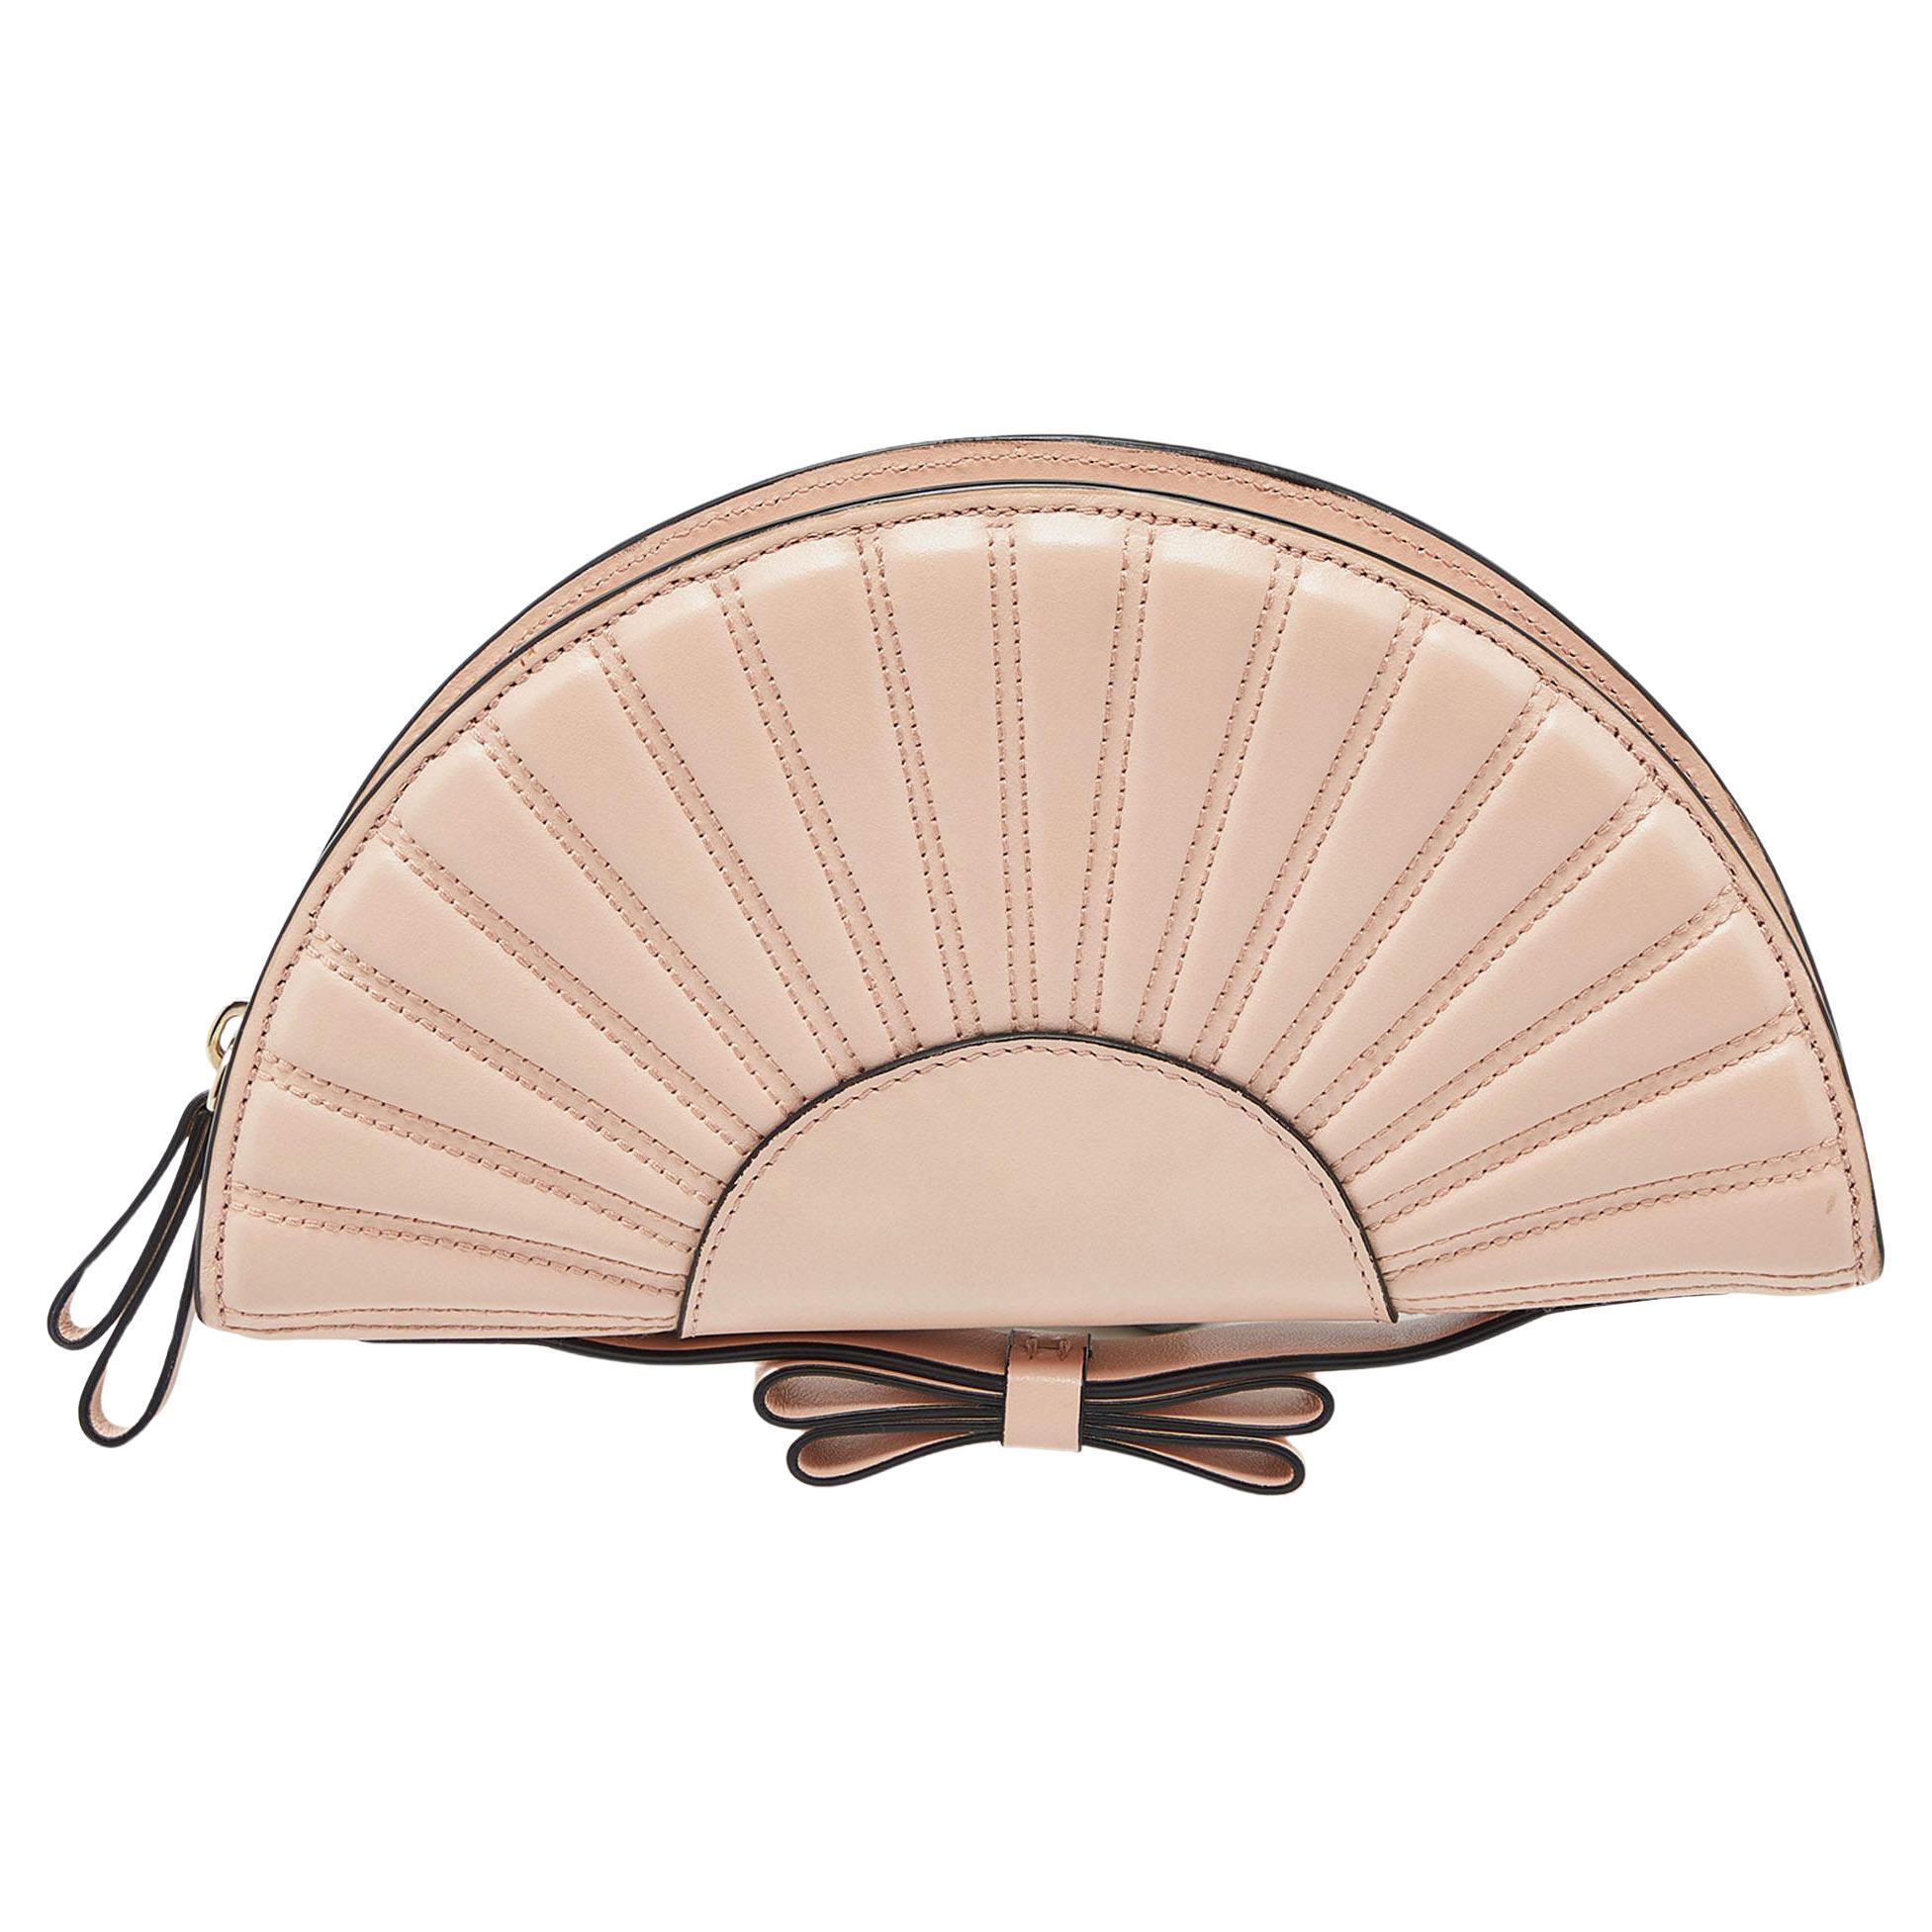 RED Valentino Peach Leather Bow Shell Clutch